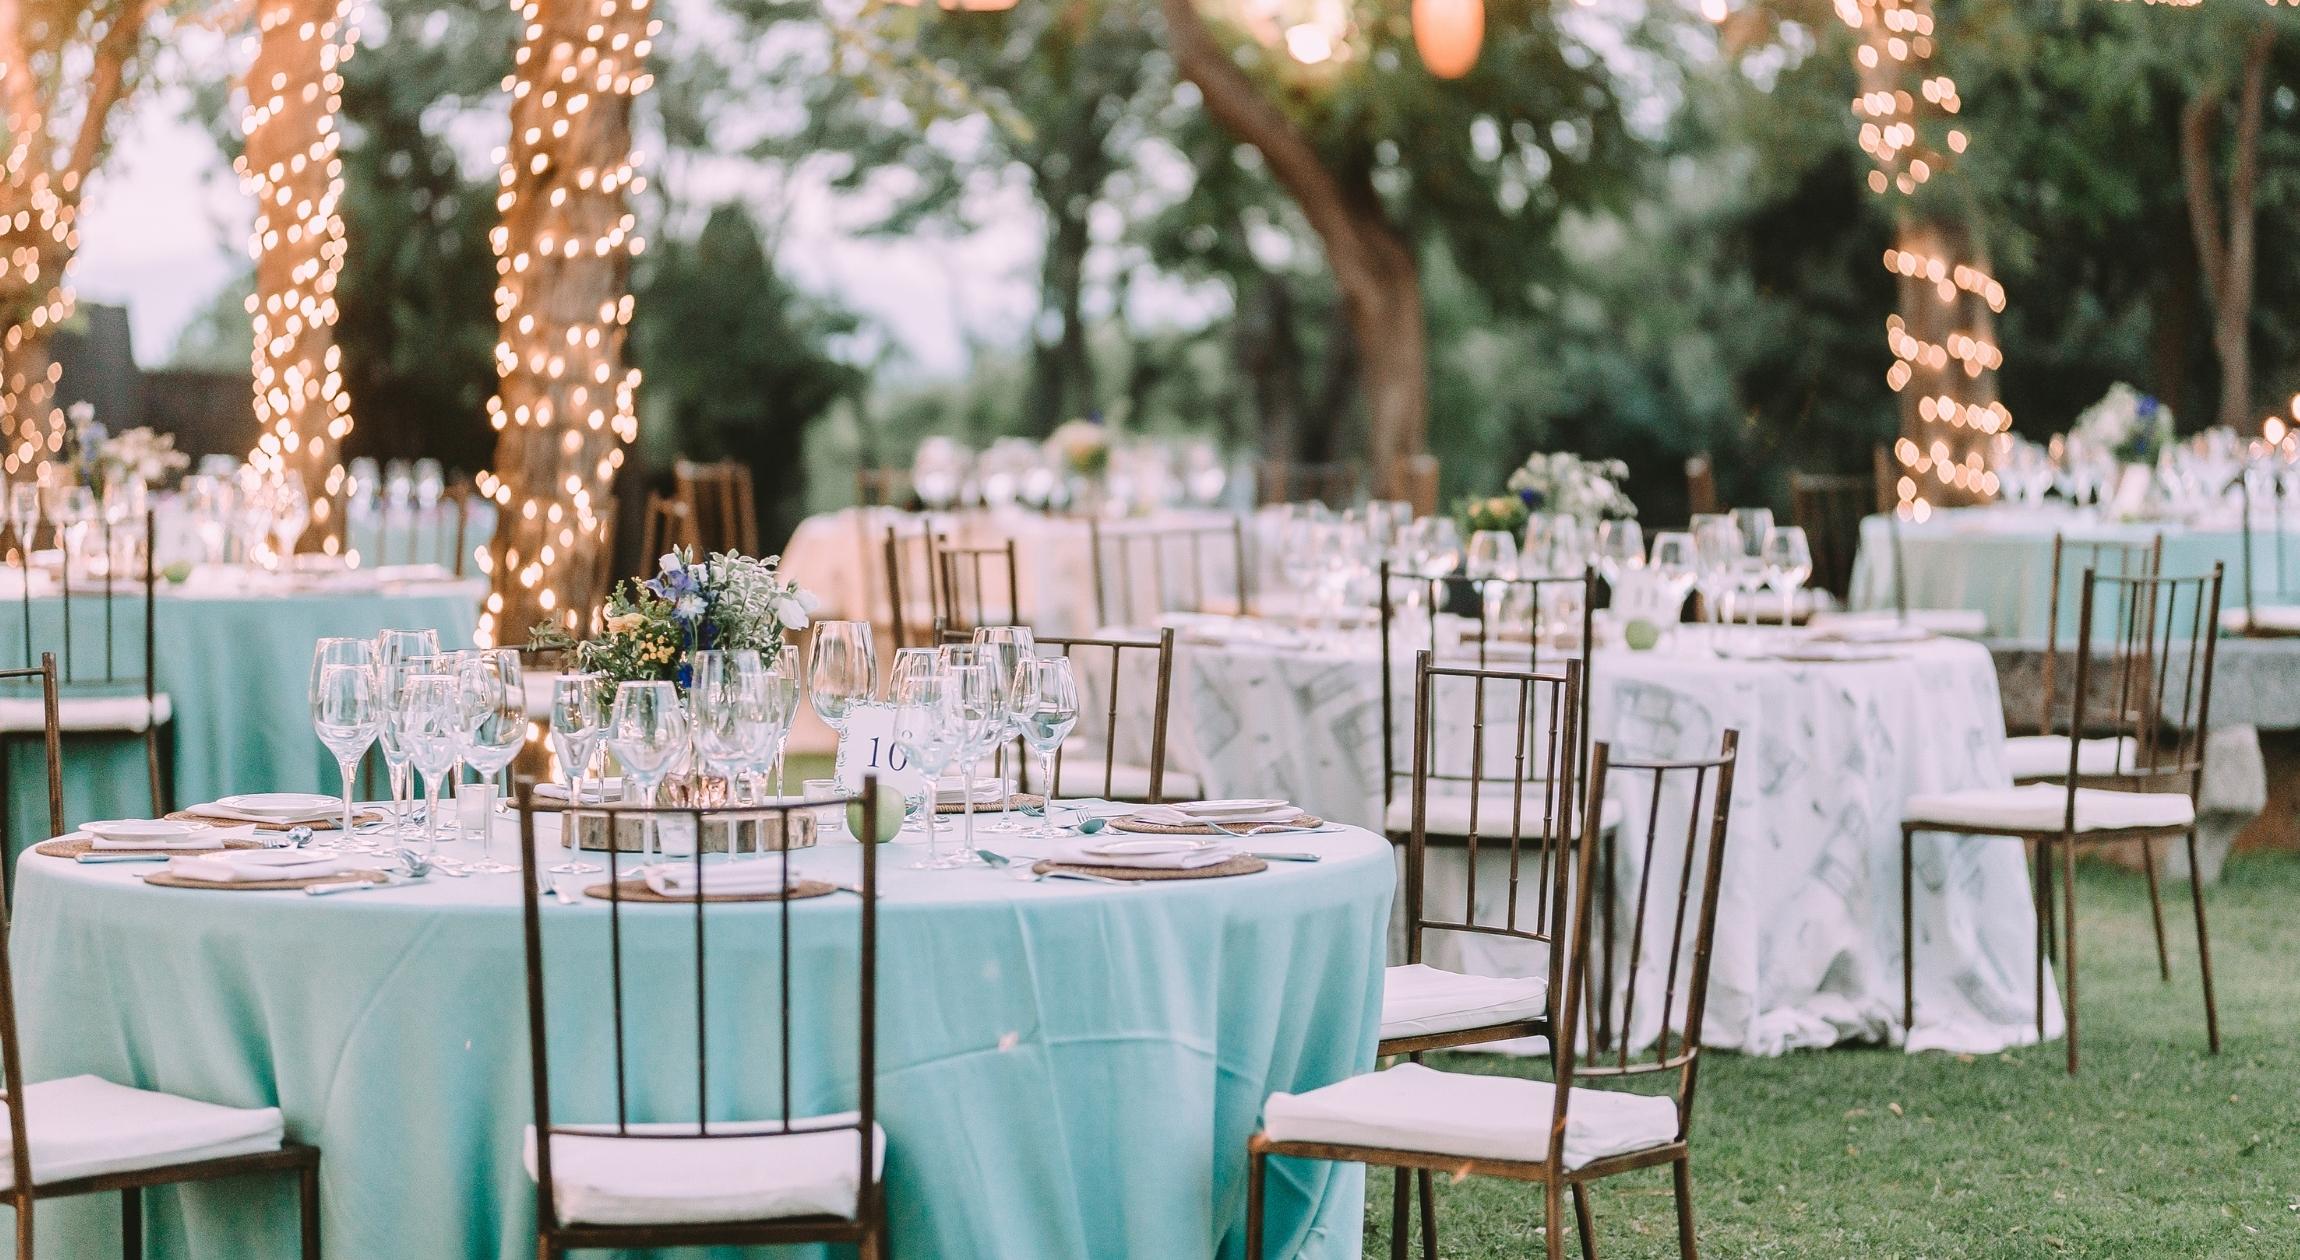 Tables and chairs decorated outdoors